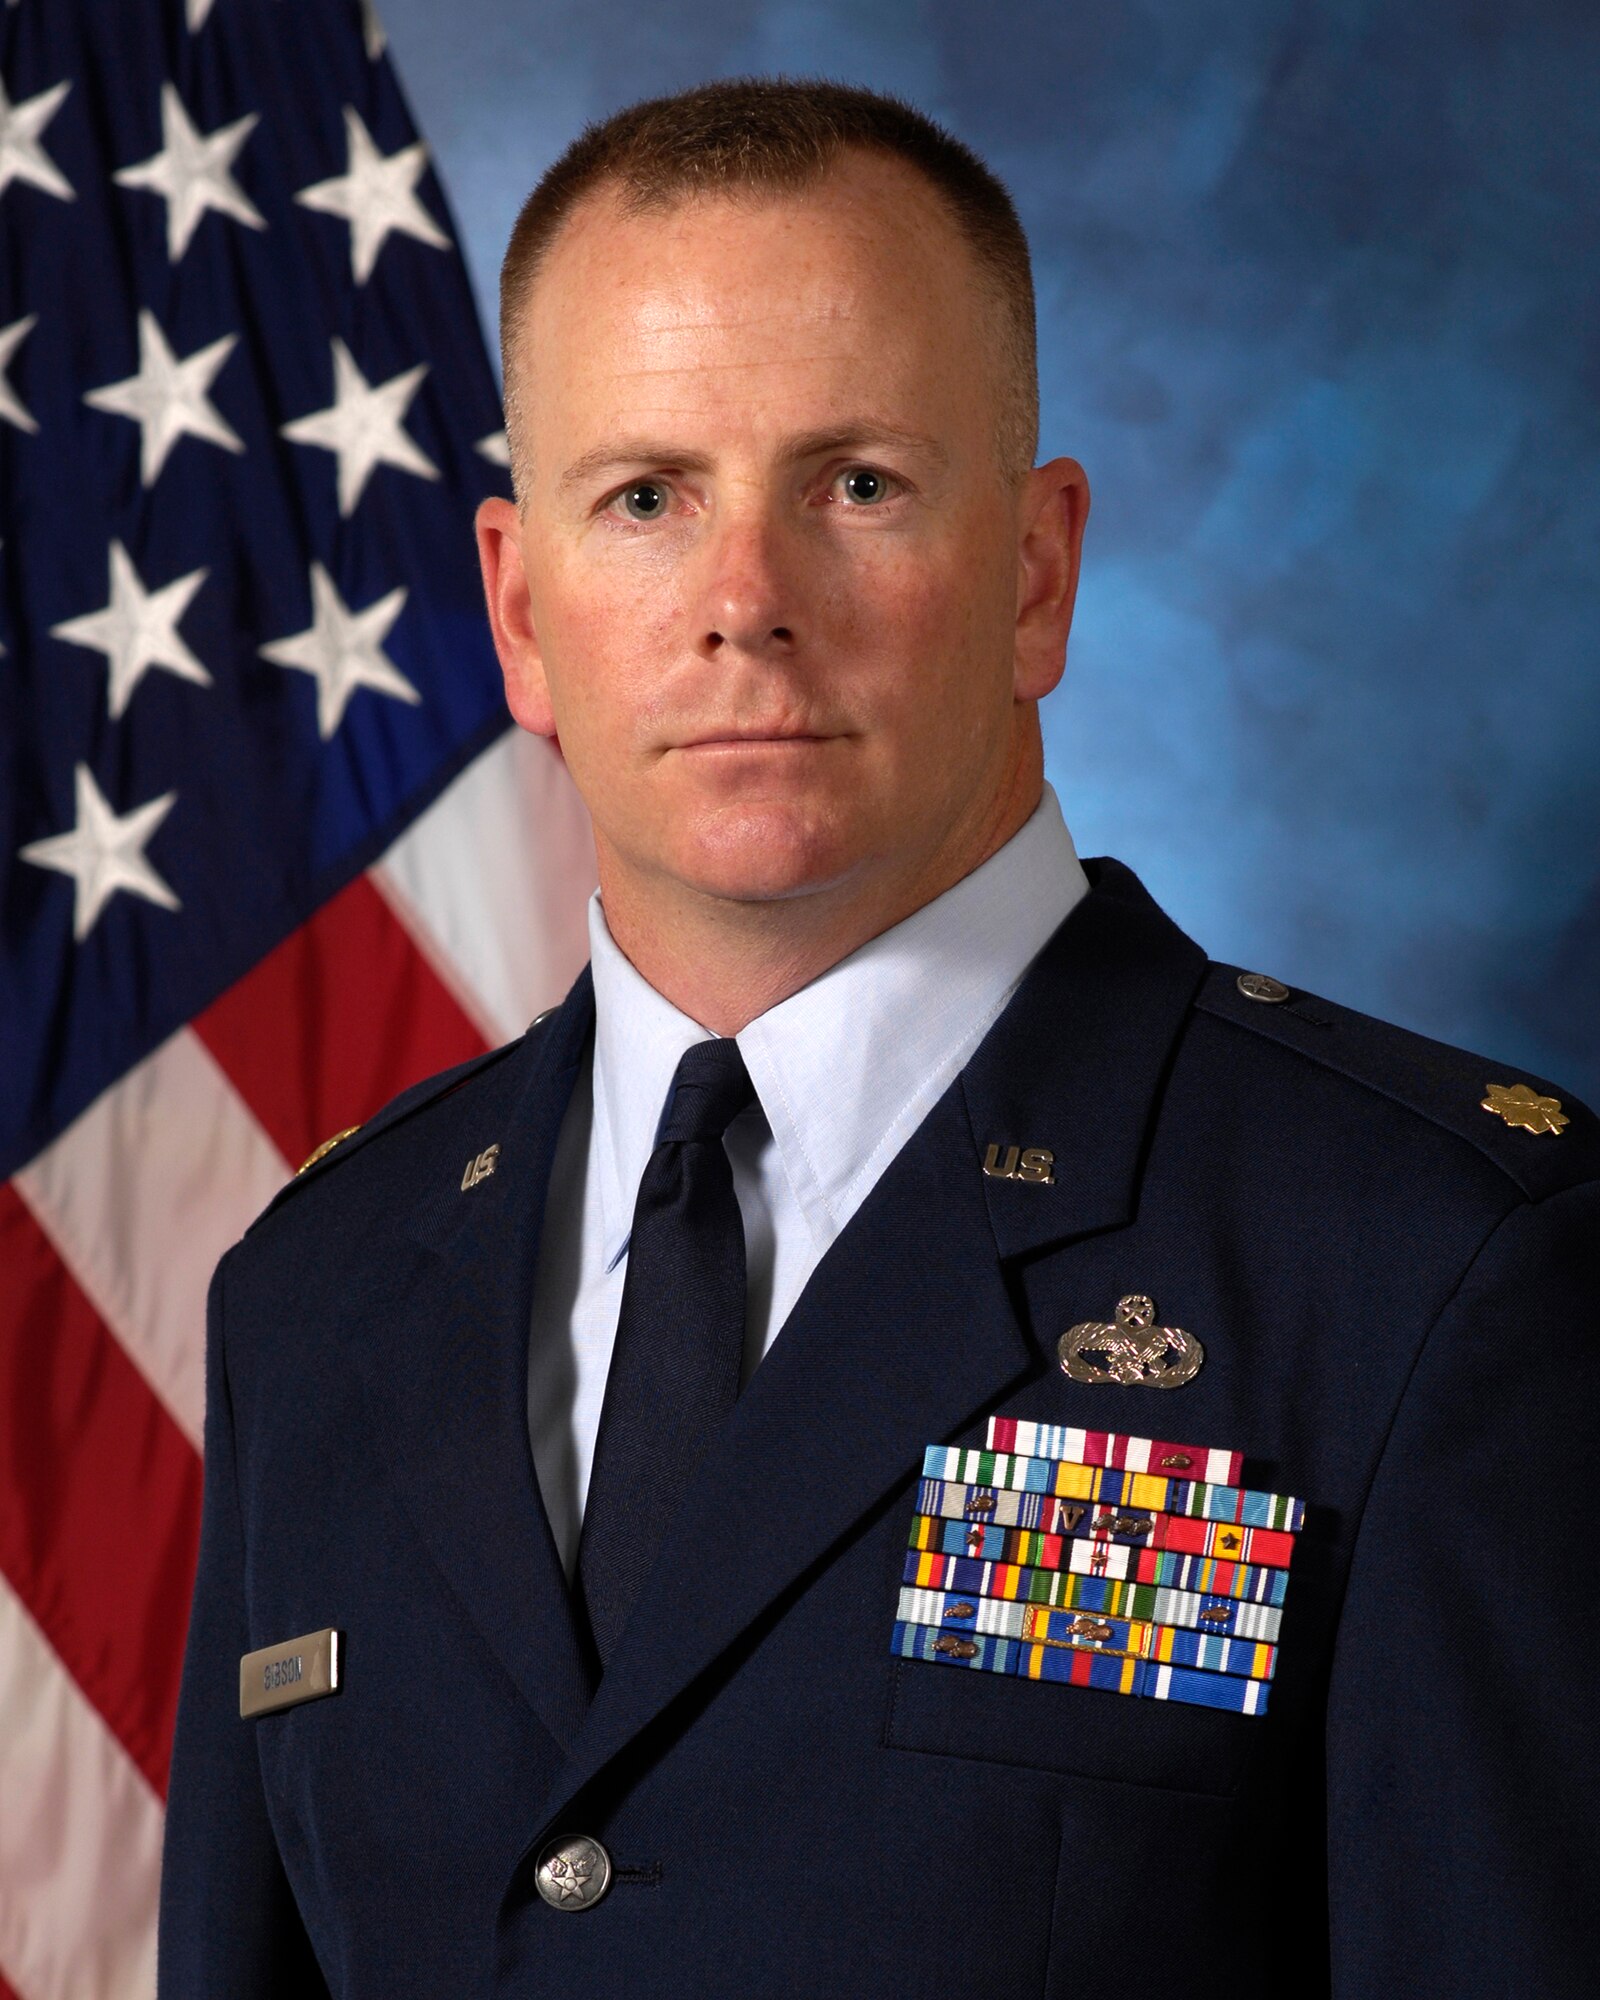 Major Brent Gibson is the 1st Special Operations Logistics Readiness Squadron commander at Hurlburt Field, Fla. Major Gibson comes to the 1 SOW from Headquarters, Air Force Special Operations Commandd, where he served as deputy chief, Logistics Readiness Division (U.S. Air Force photo).